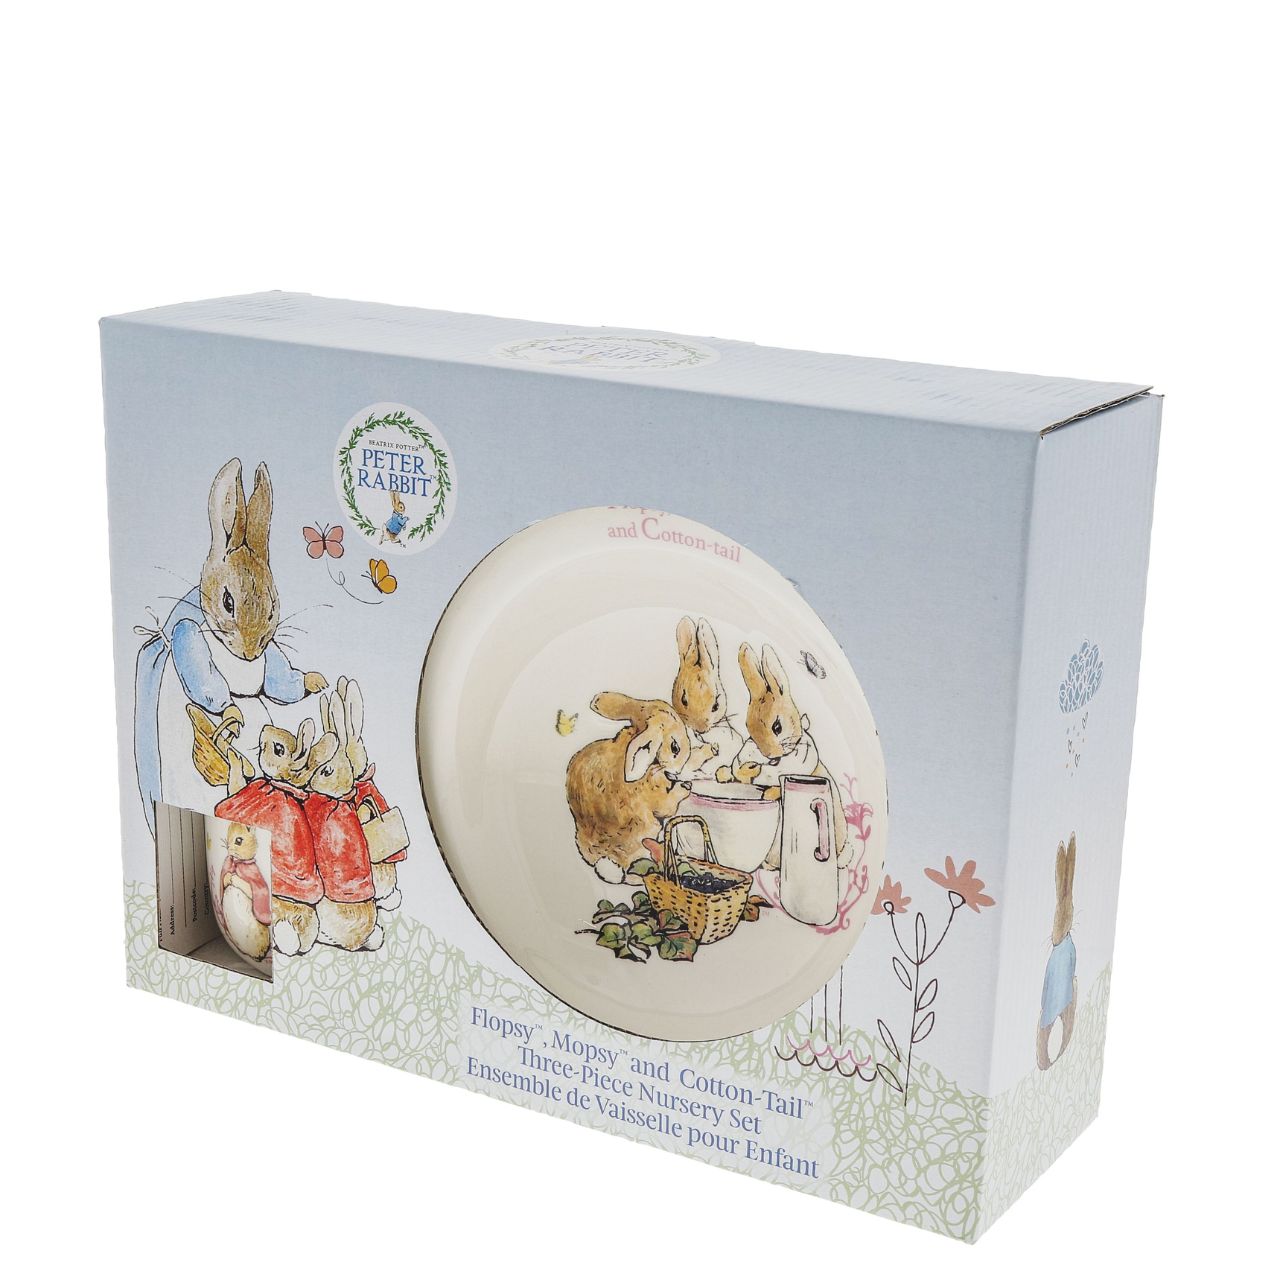 Beatrix Potter Flopsy, Mopsy & Cotton-tail Three-Piece Nursery Set  This beautiful Flopsy, Mopsy and Cotton-tail three-piece nursery set would make perfect for christening gifts, gifts for children or even a lovely birthday gift for a small child. Parents will be over the moon with such a unique gift.